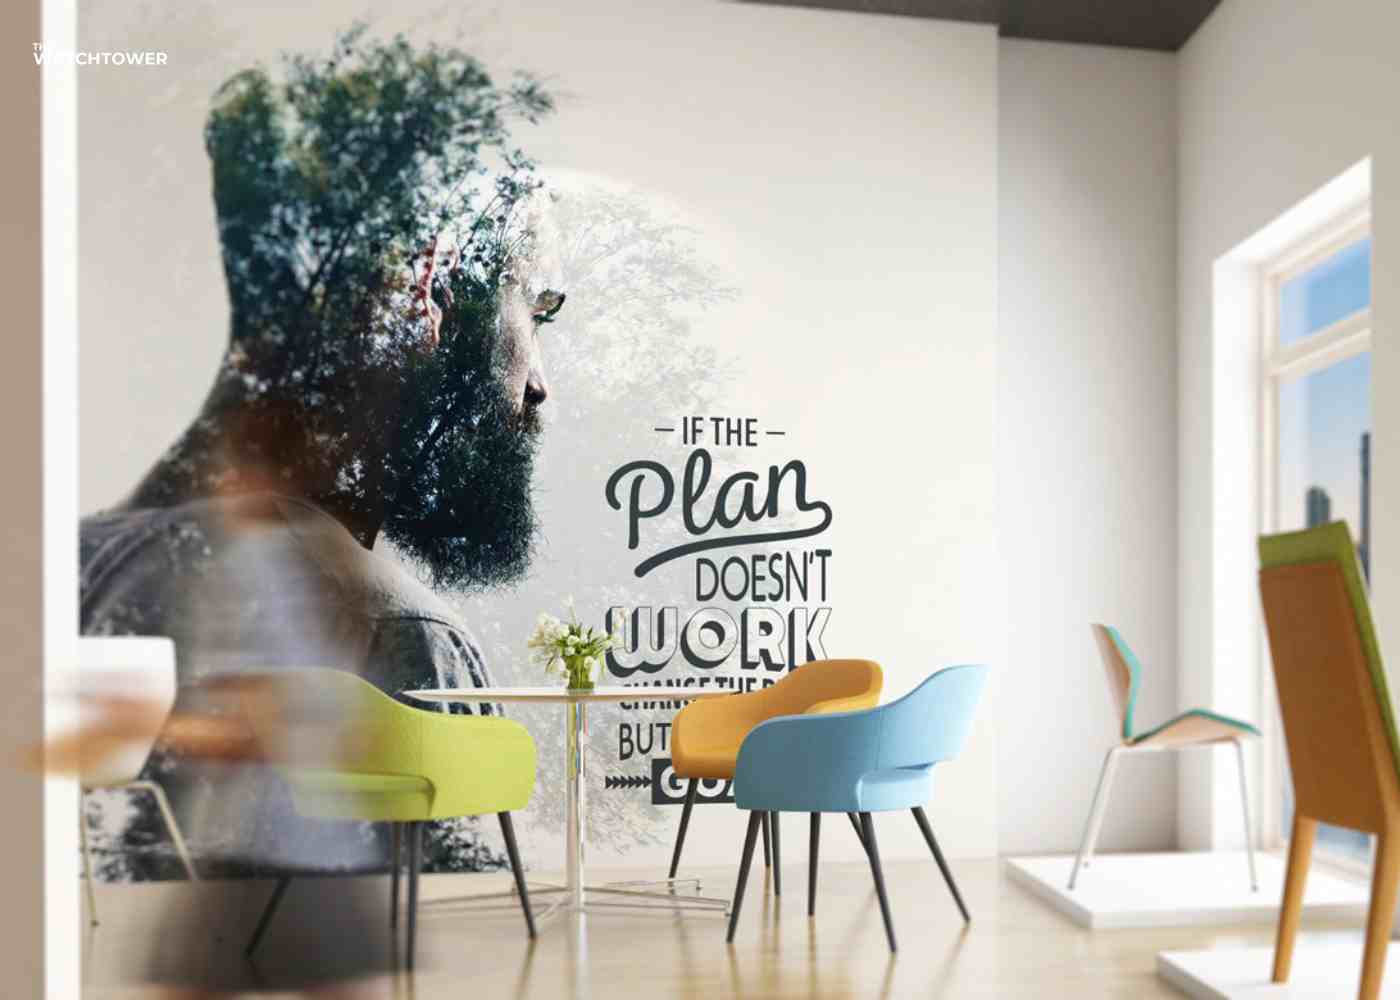 Get Ready for Outlandish Visuals - The Best Wall Branding Every Conference Room Needs